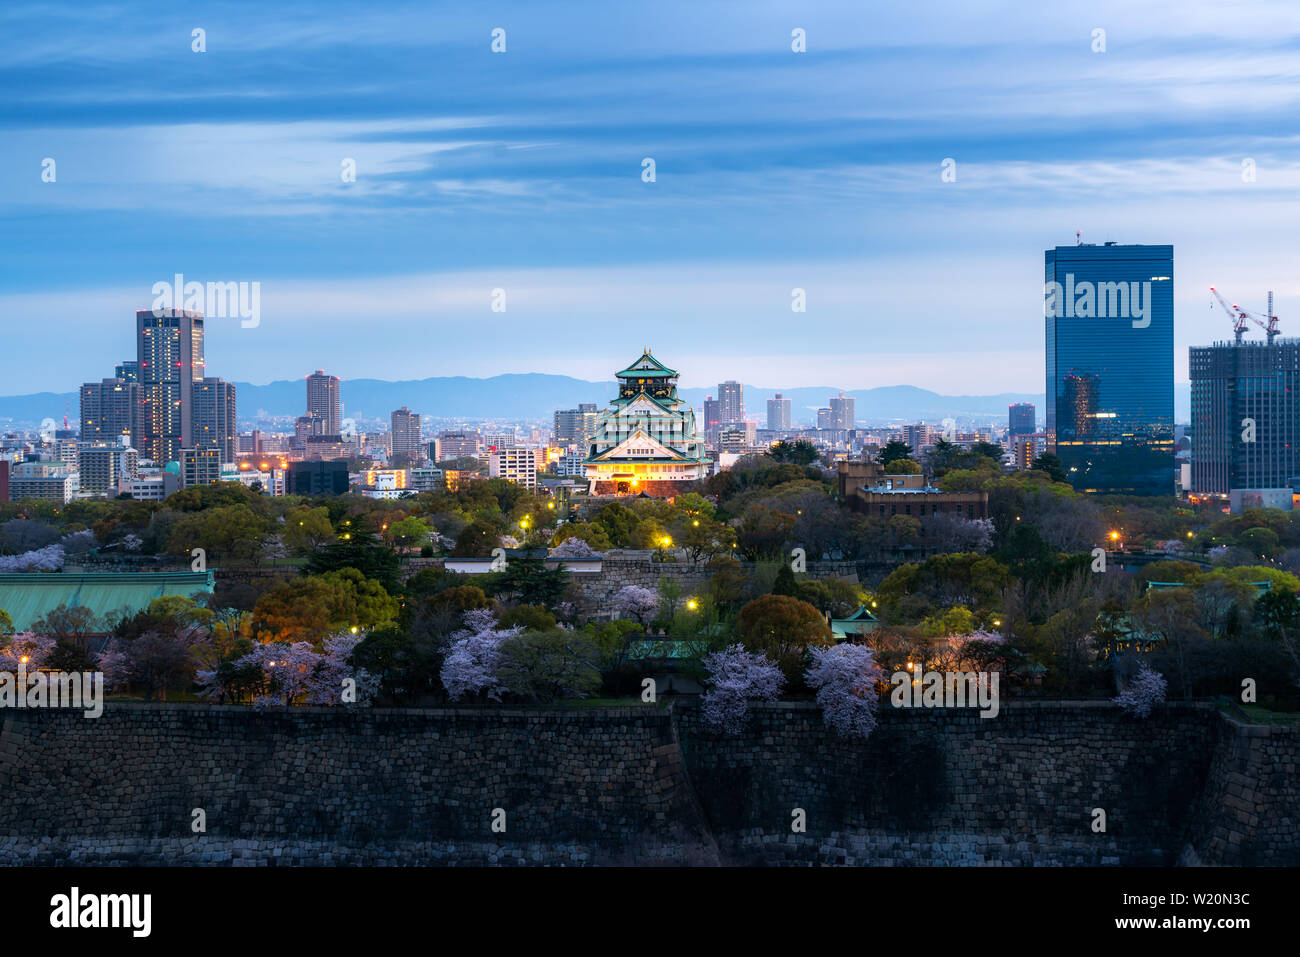 Osaka castle with cherry blossom and business district in background at Osaka, Japan. Stock Photo